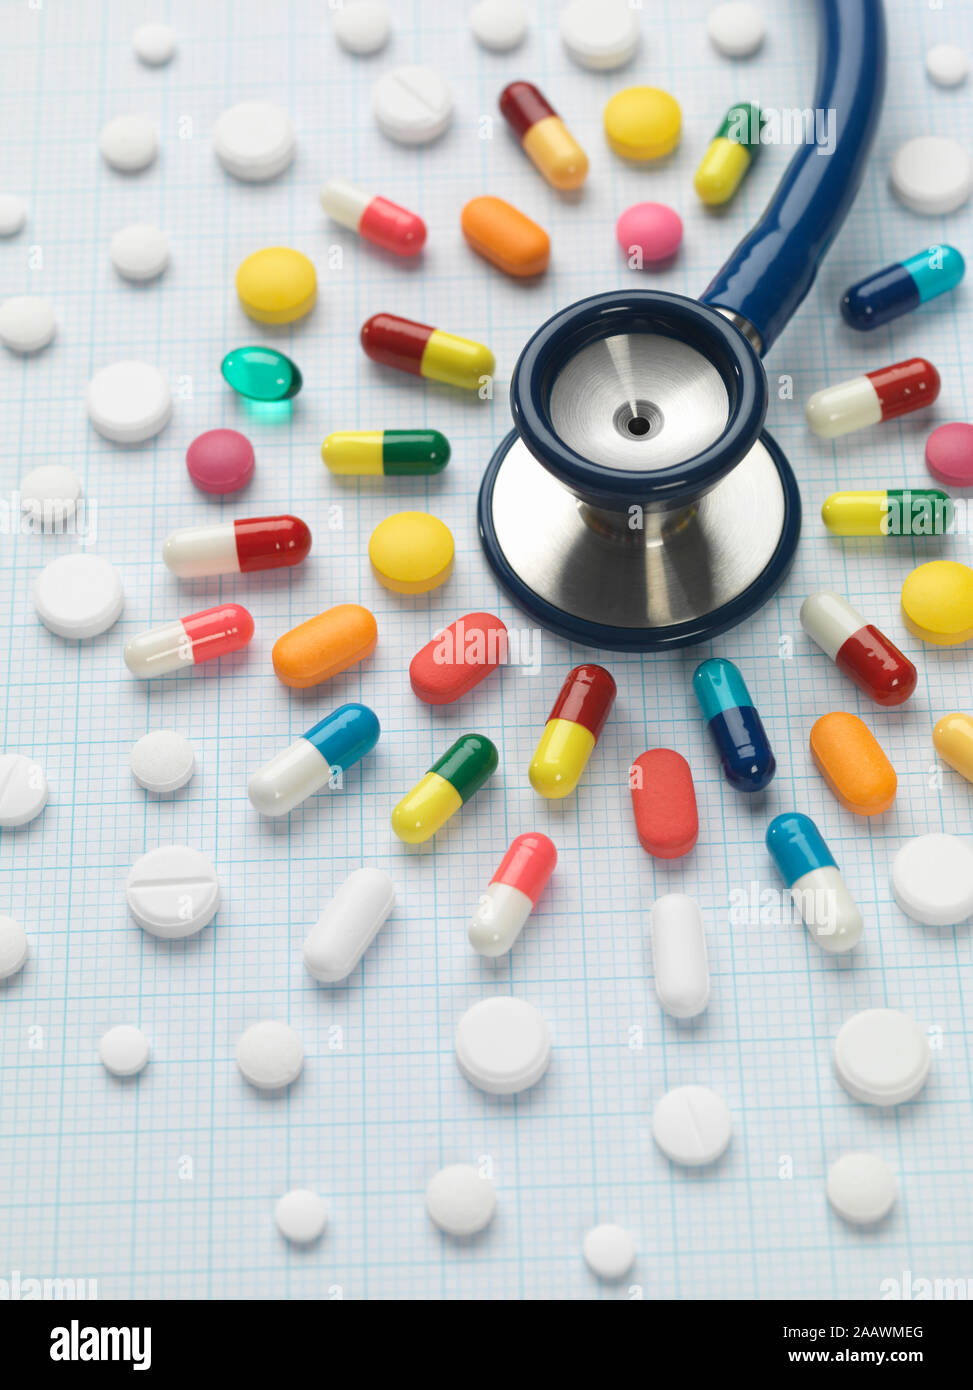 High angle view of various medicines arranged around stethoscope on graph paper Stock Photo